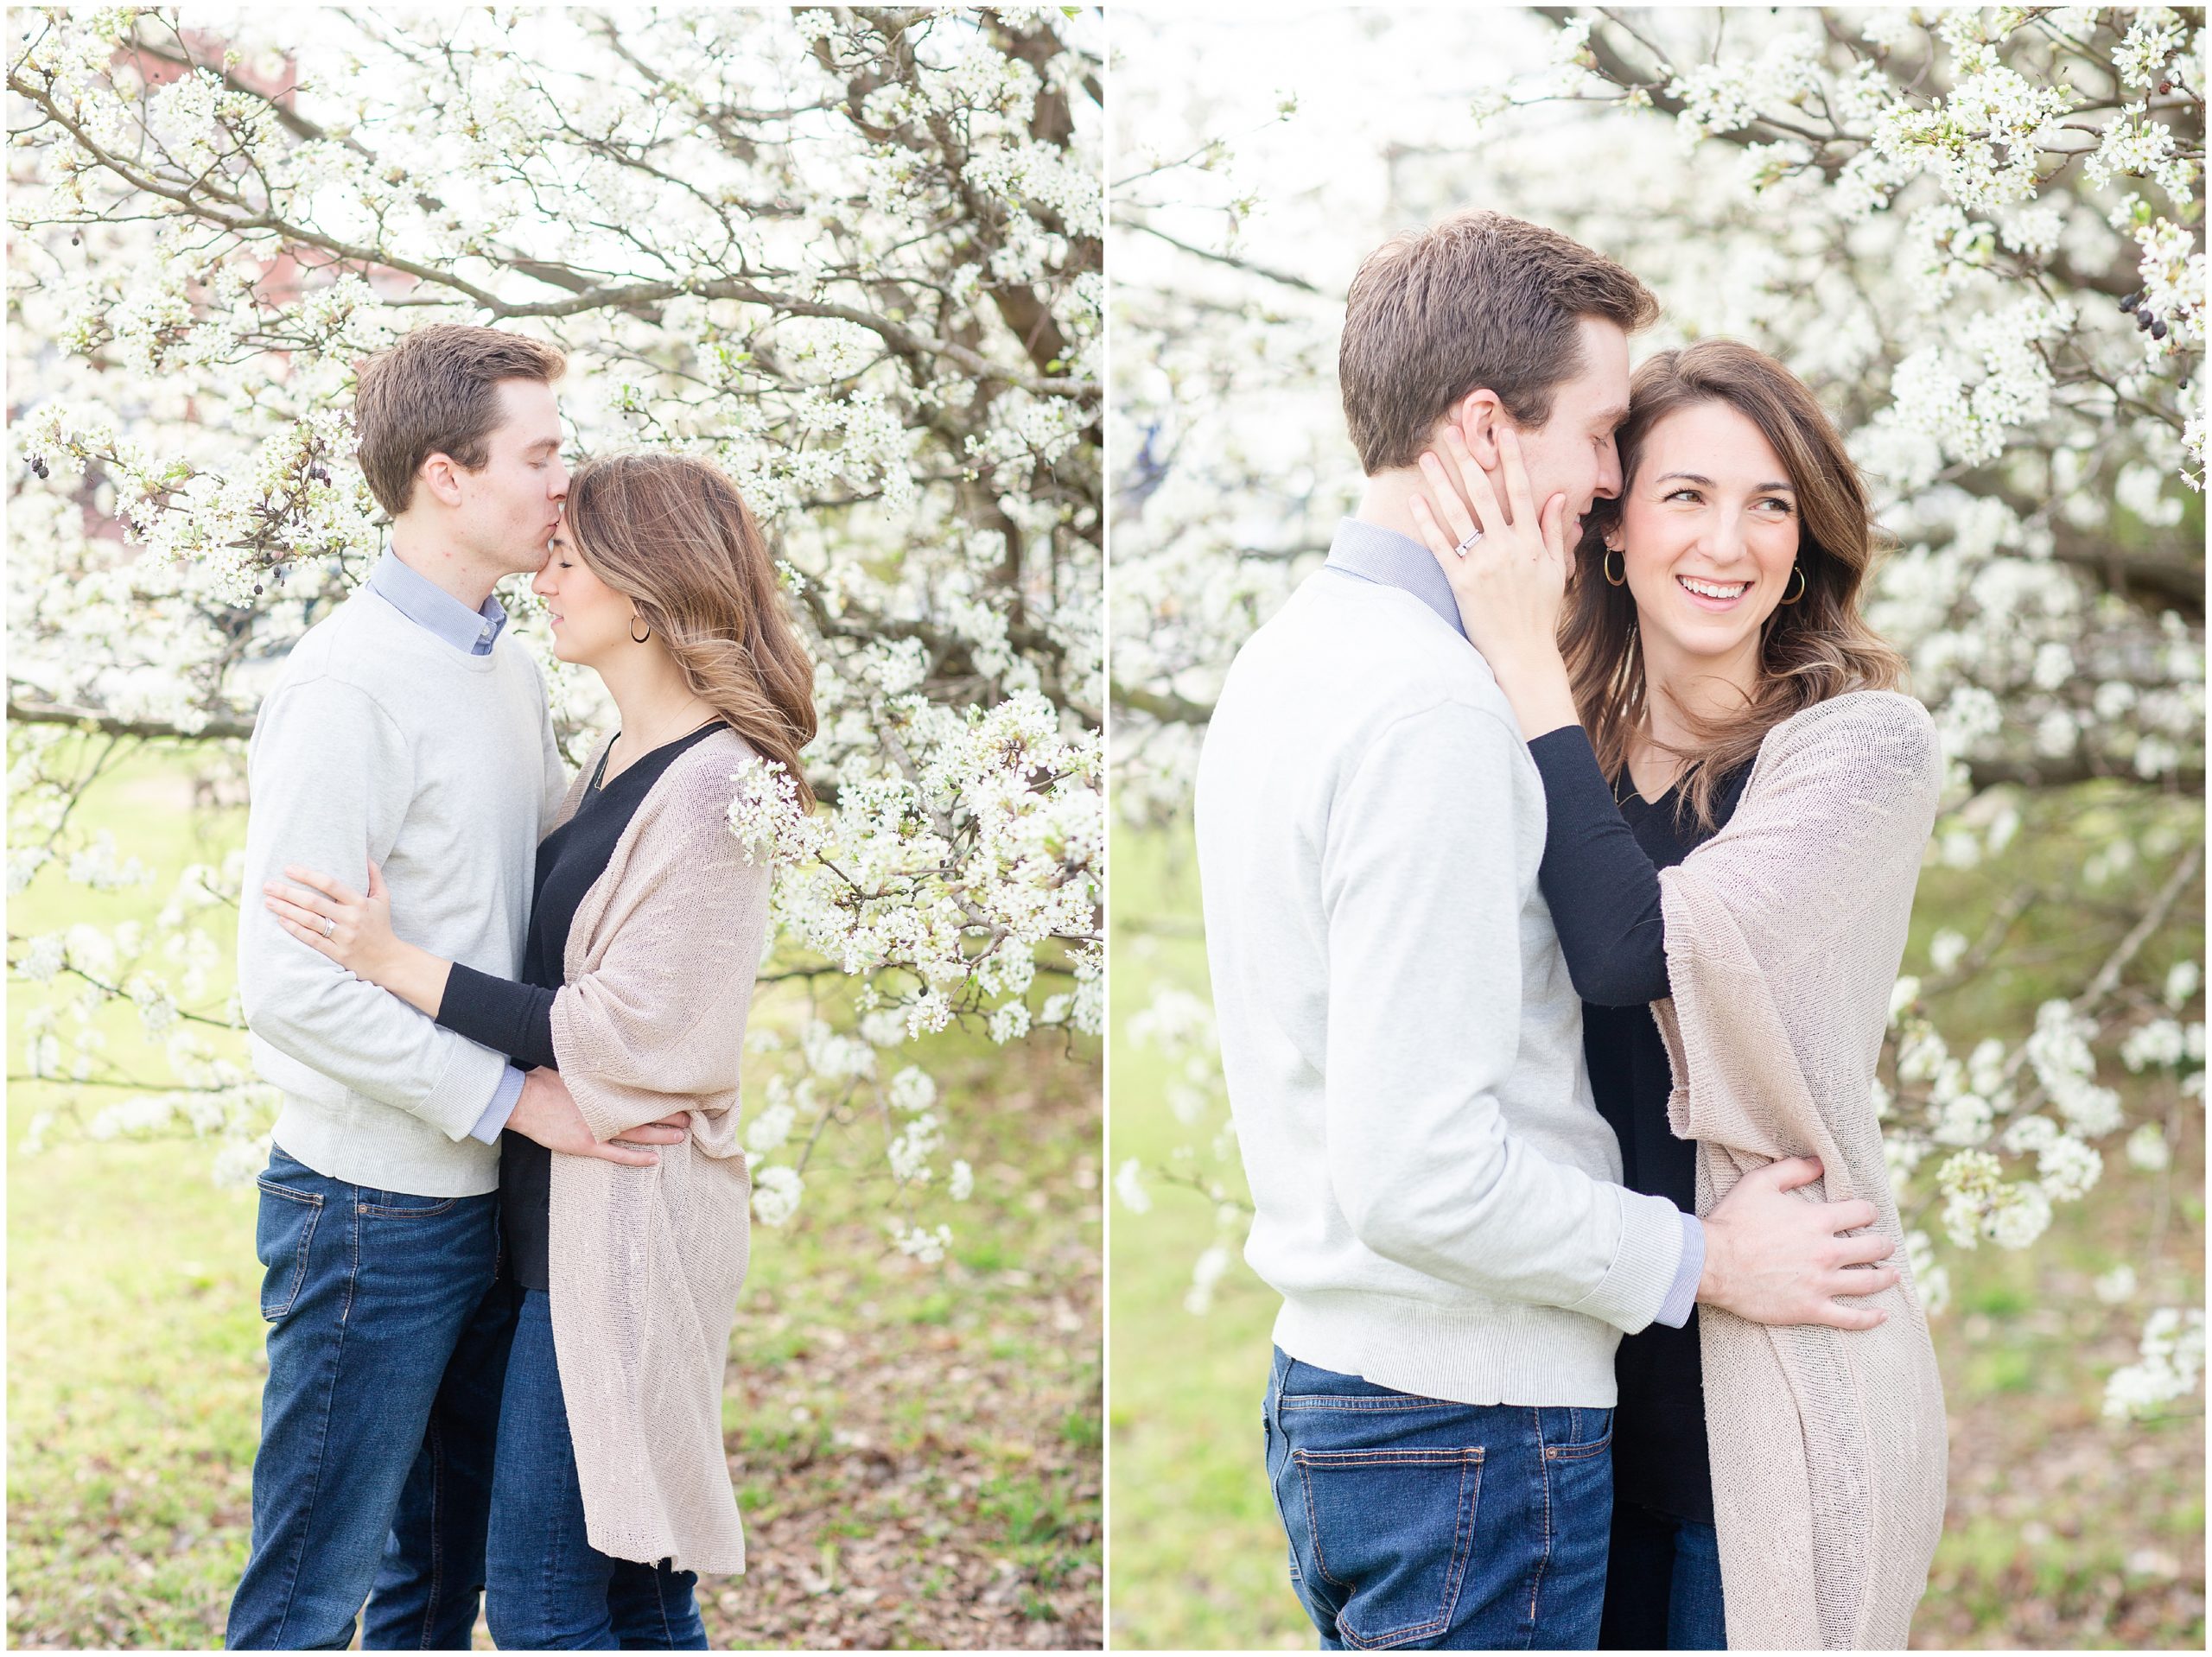 Lawrenceville Anniversary Session for married couple